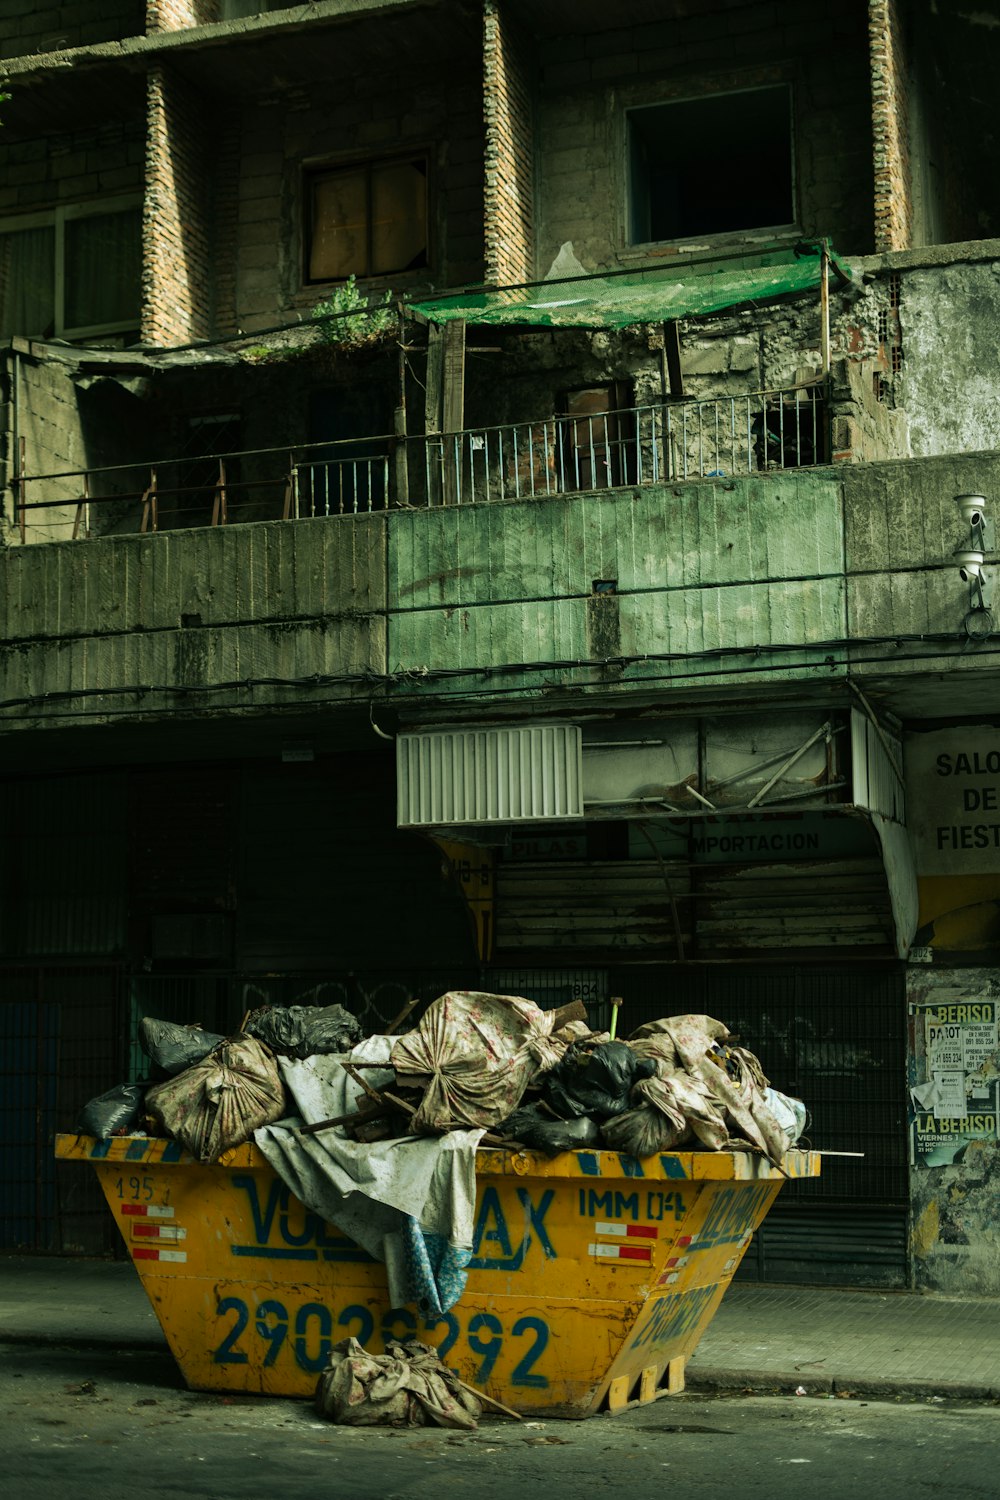 a dumpster filled with garbage sitting in front of a building